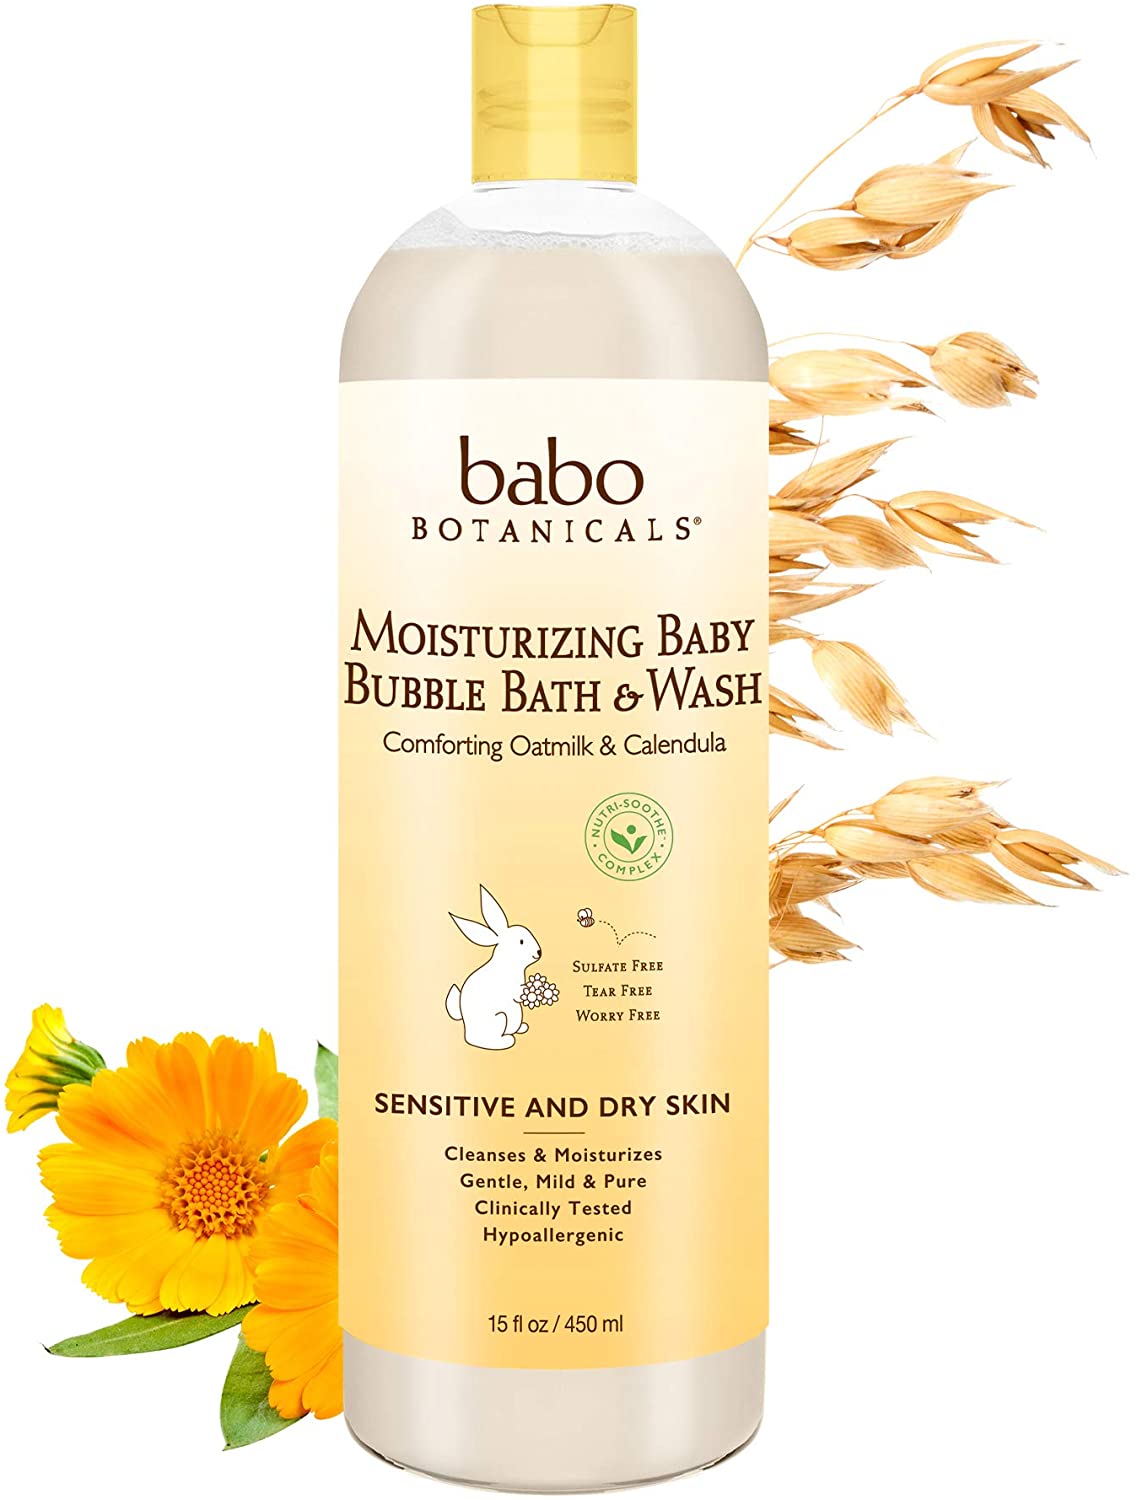 Skin care for moms and babies